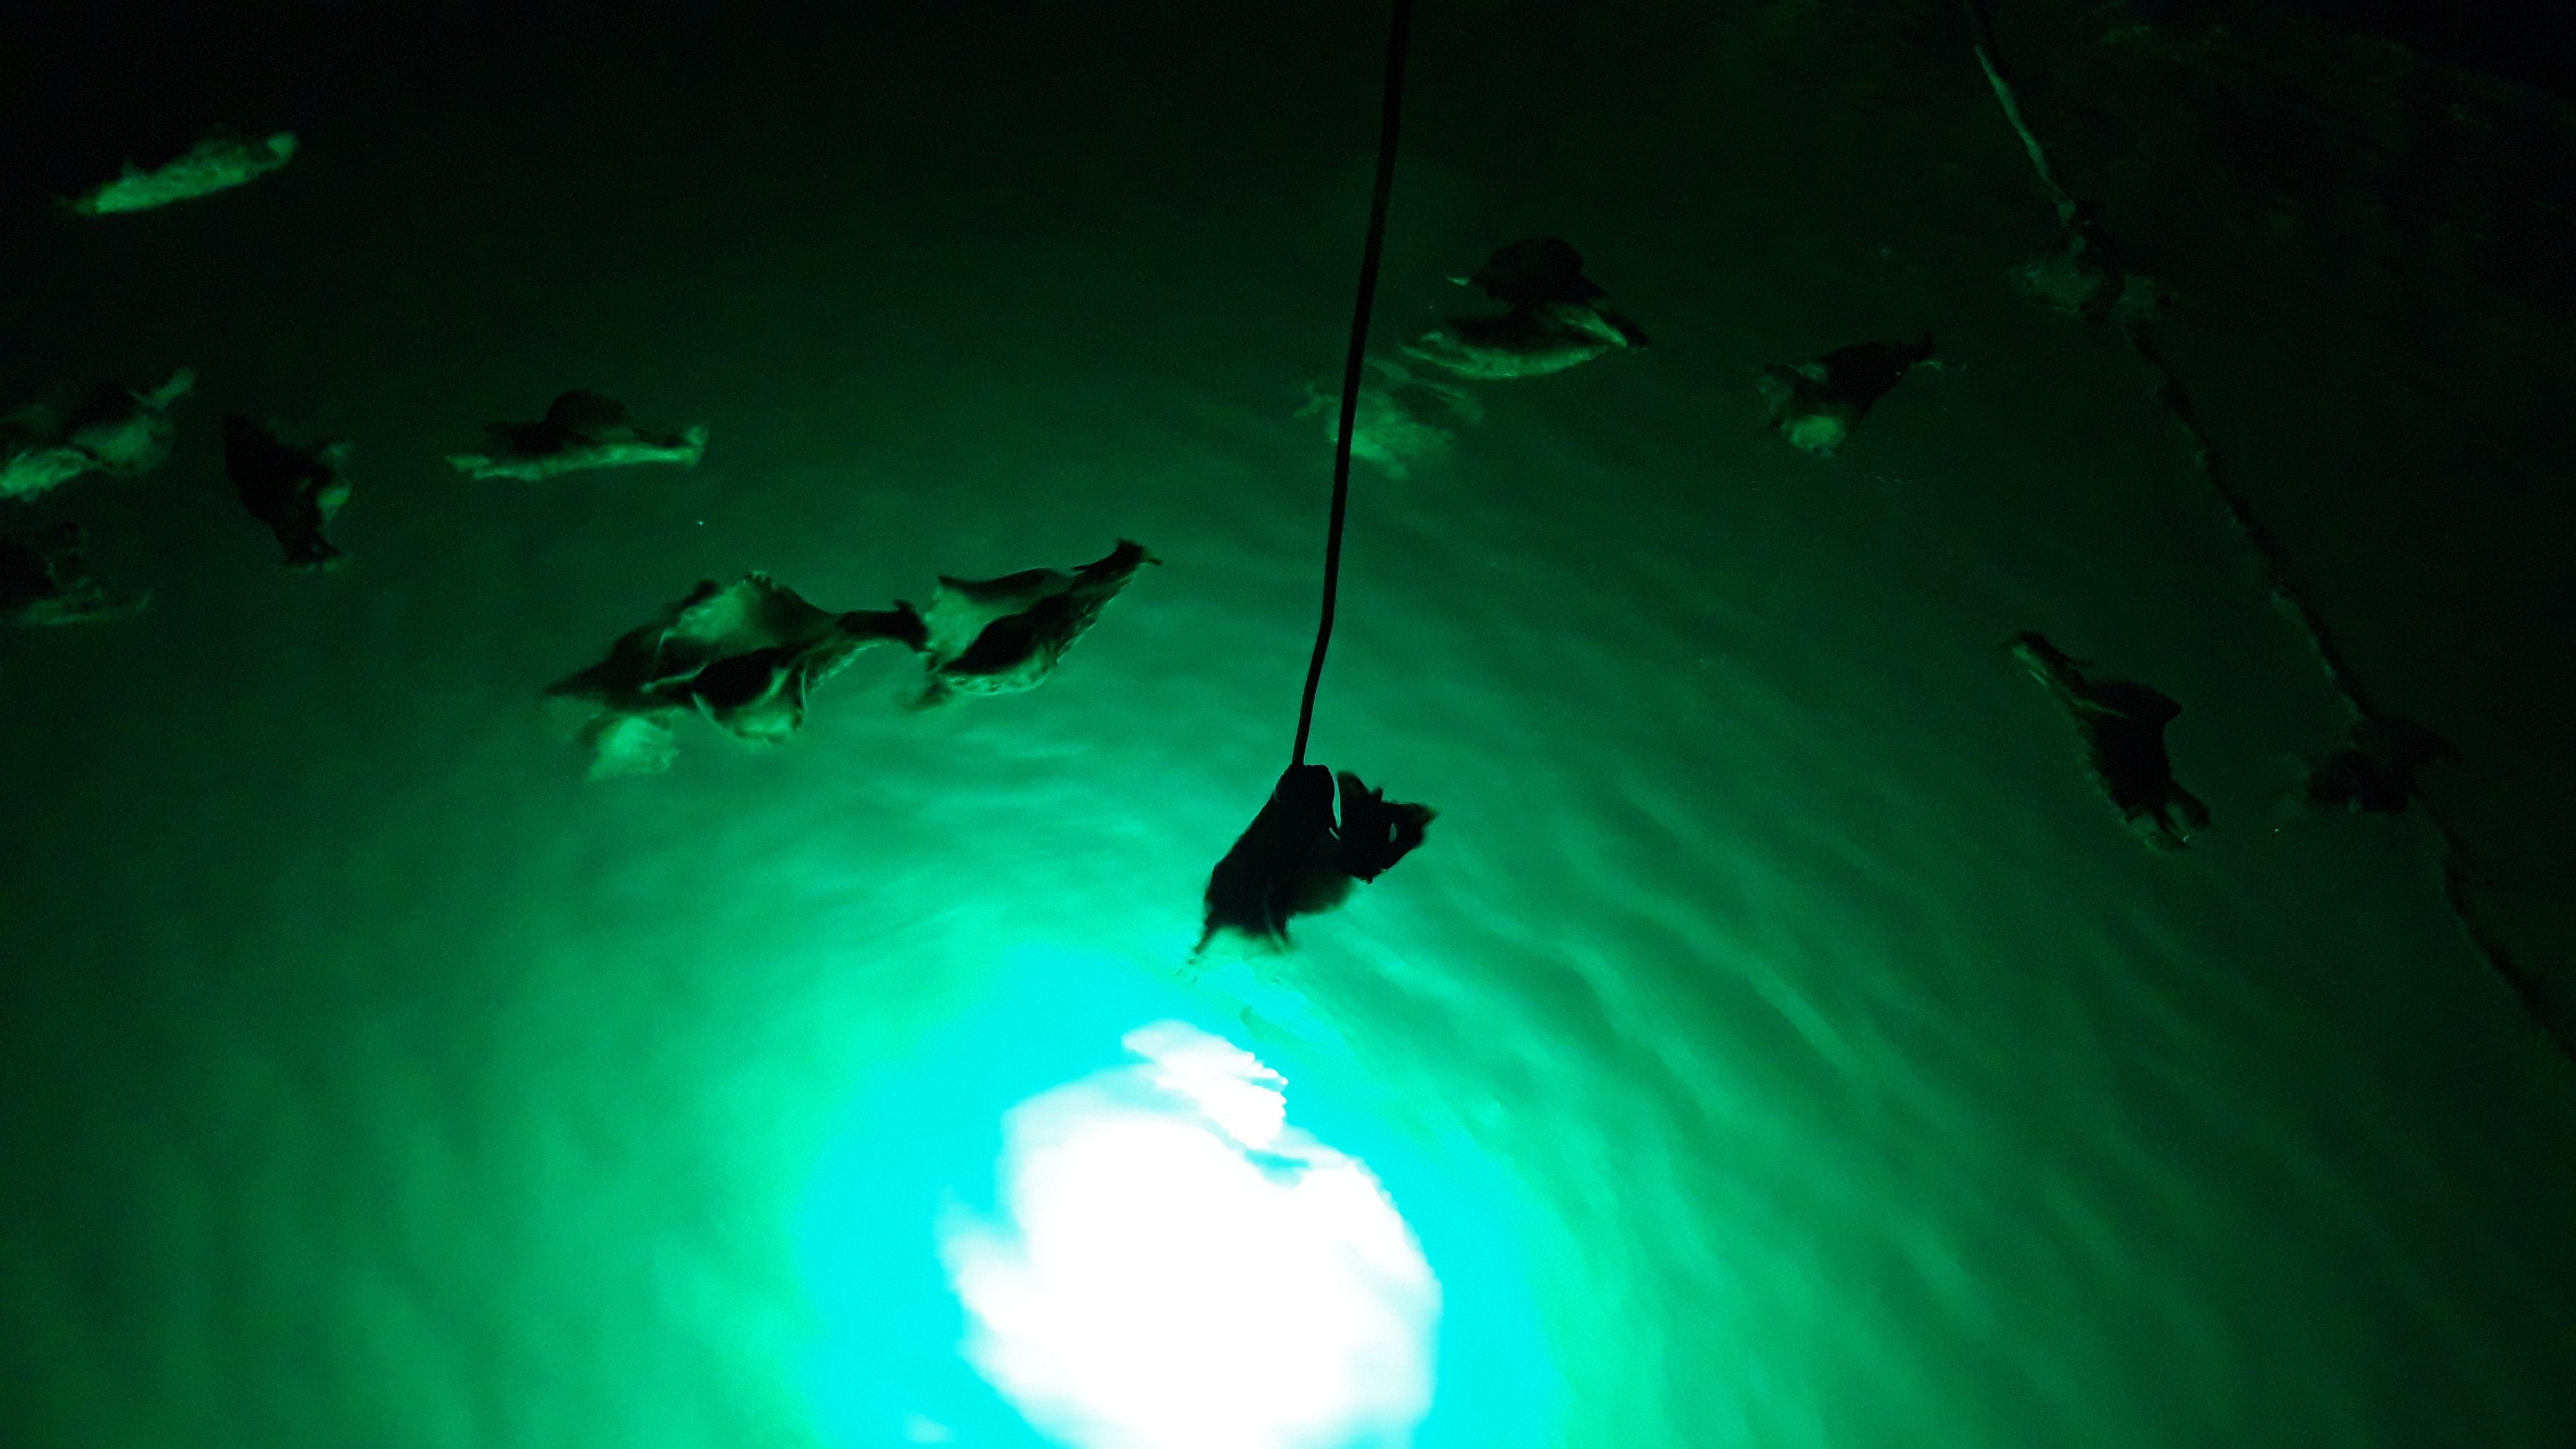  Green Blob Outdoors New Underwater LED Fishing Light 15000  Lumens 12V Battery Powered with Alligator Clips and 30ft Cord Fish Light  Attracting Snook Crappie for Boats, Made in Texas (30ft Cord) 